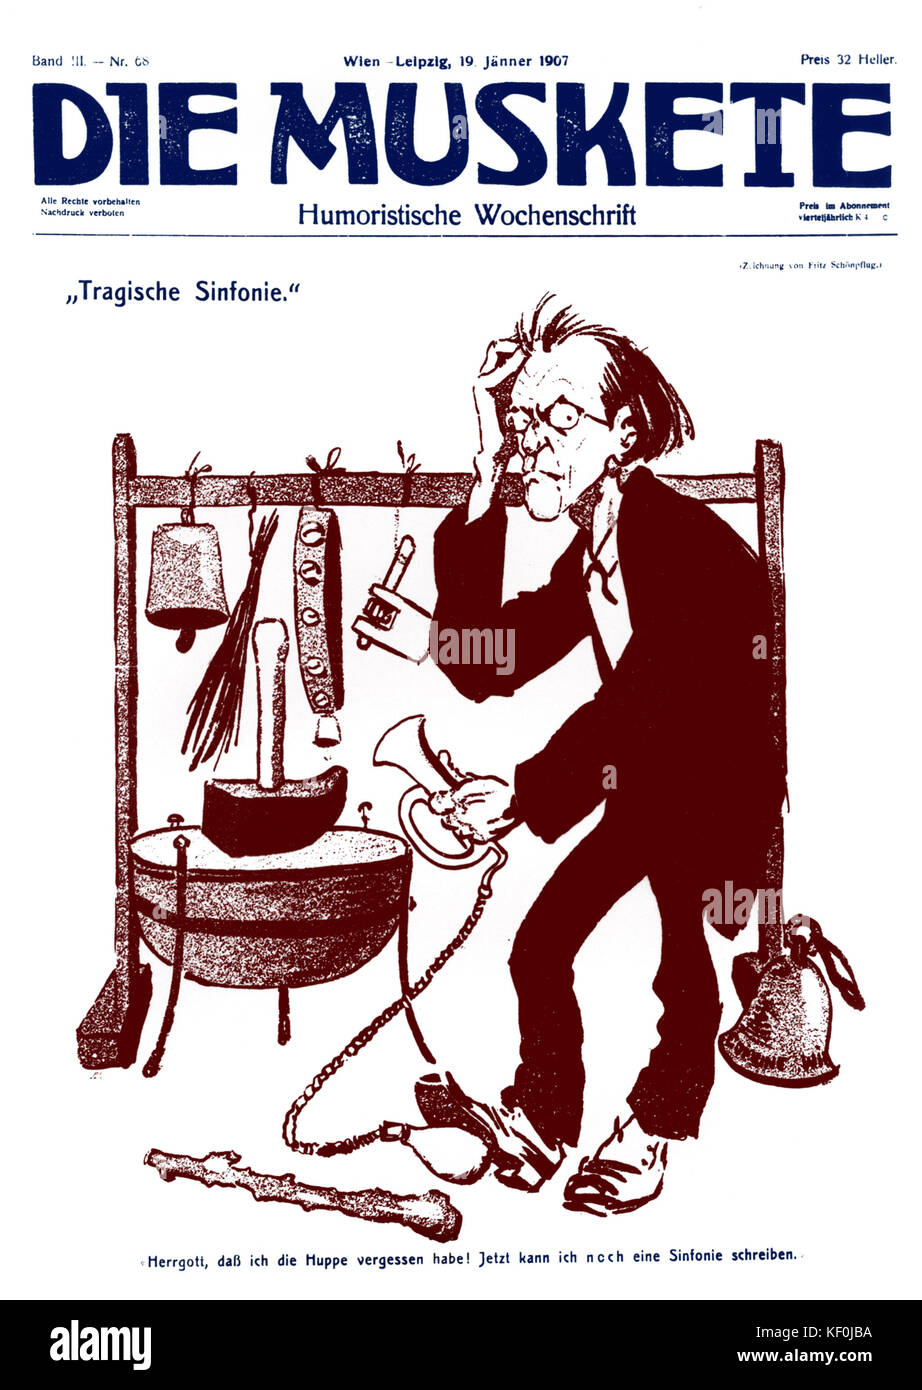 Gustav Mahler caricature about 1st performance of Mahler's 6th Symphony  from Die Muskete 19th January 1907. Caption reads ' Tragische Sinfonie ' (top left corner) ' Hergott, das ich die Huppe vergessen habe! Jetzt kann ich noch eine Sinfonie schreiben '. (Good gracious! Fancy leaving out the motor horn! Ah well, now I have an excuse for writing another symphony ' . Stock Photo